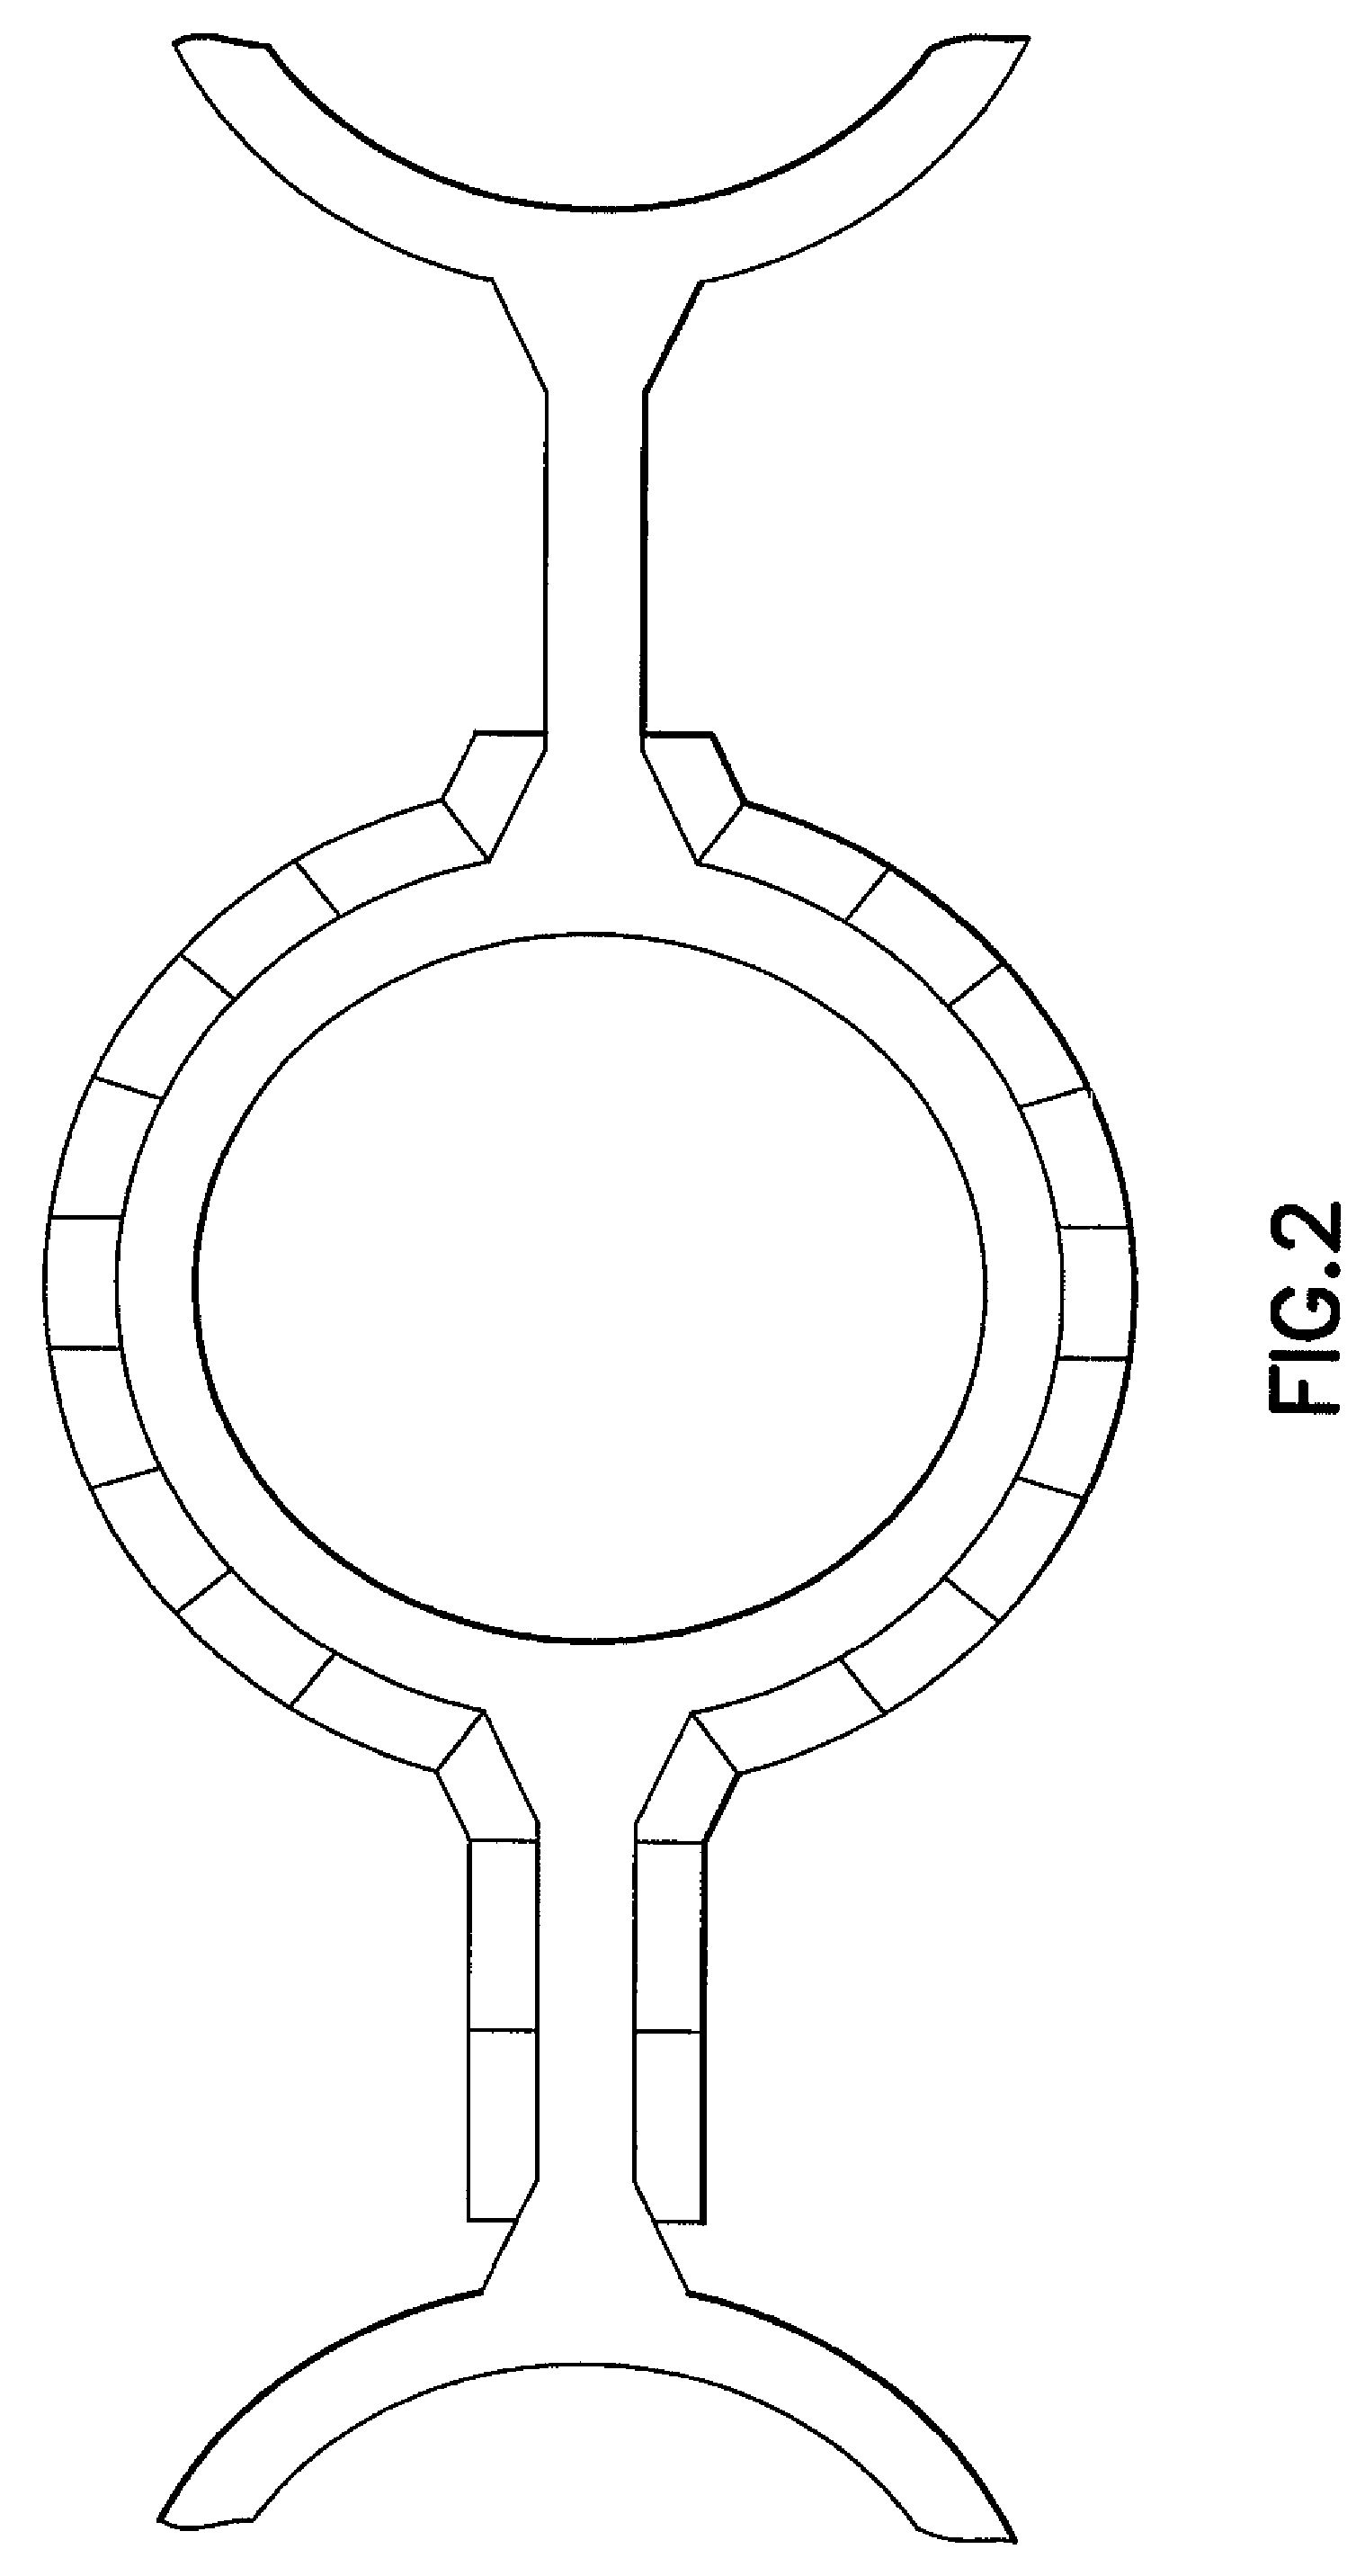 Method and system for weld bead sequencing to reduce distortion and stress